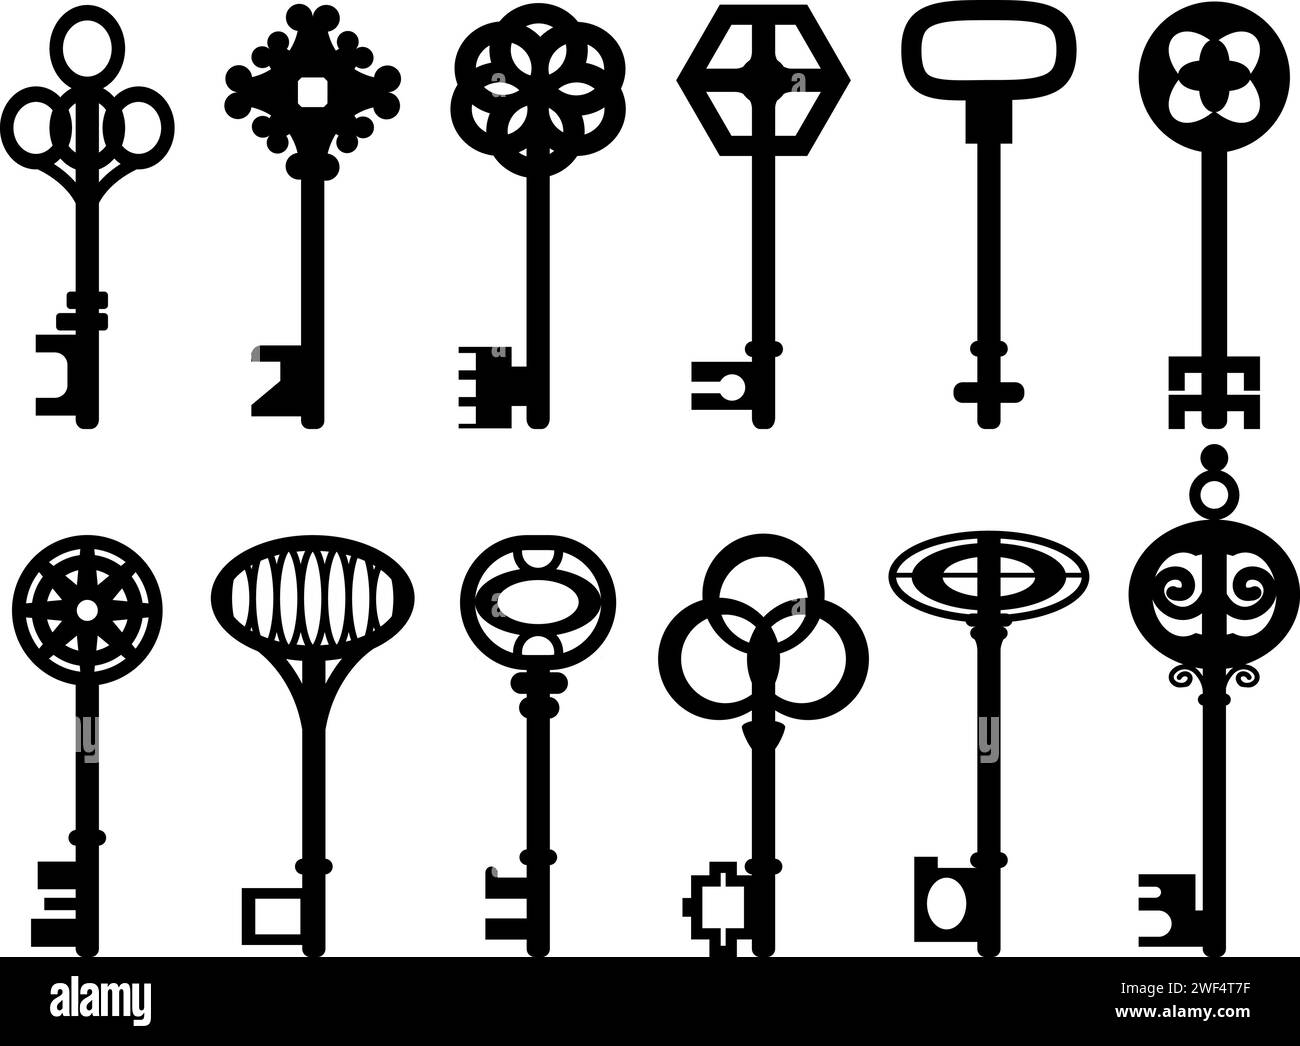 Decorative Ornate Vintage Key Silhouette, Medieval Abstract Key Elements Stock Vector